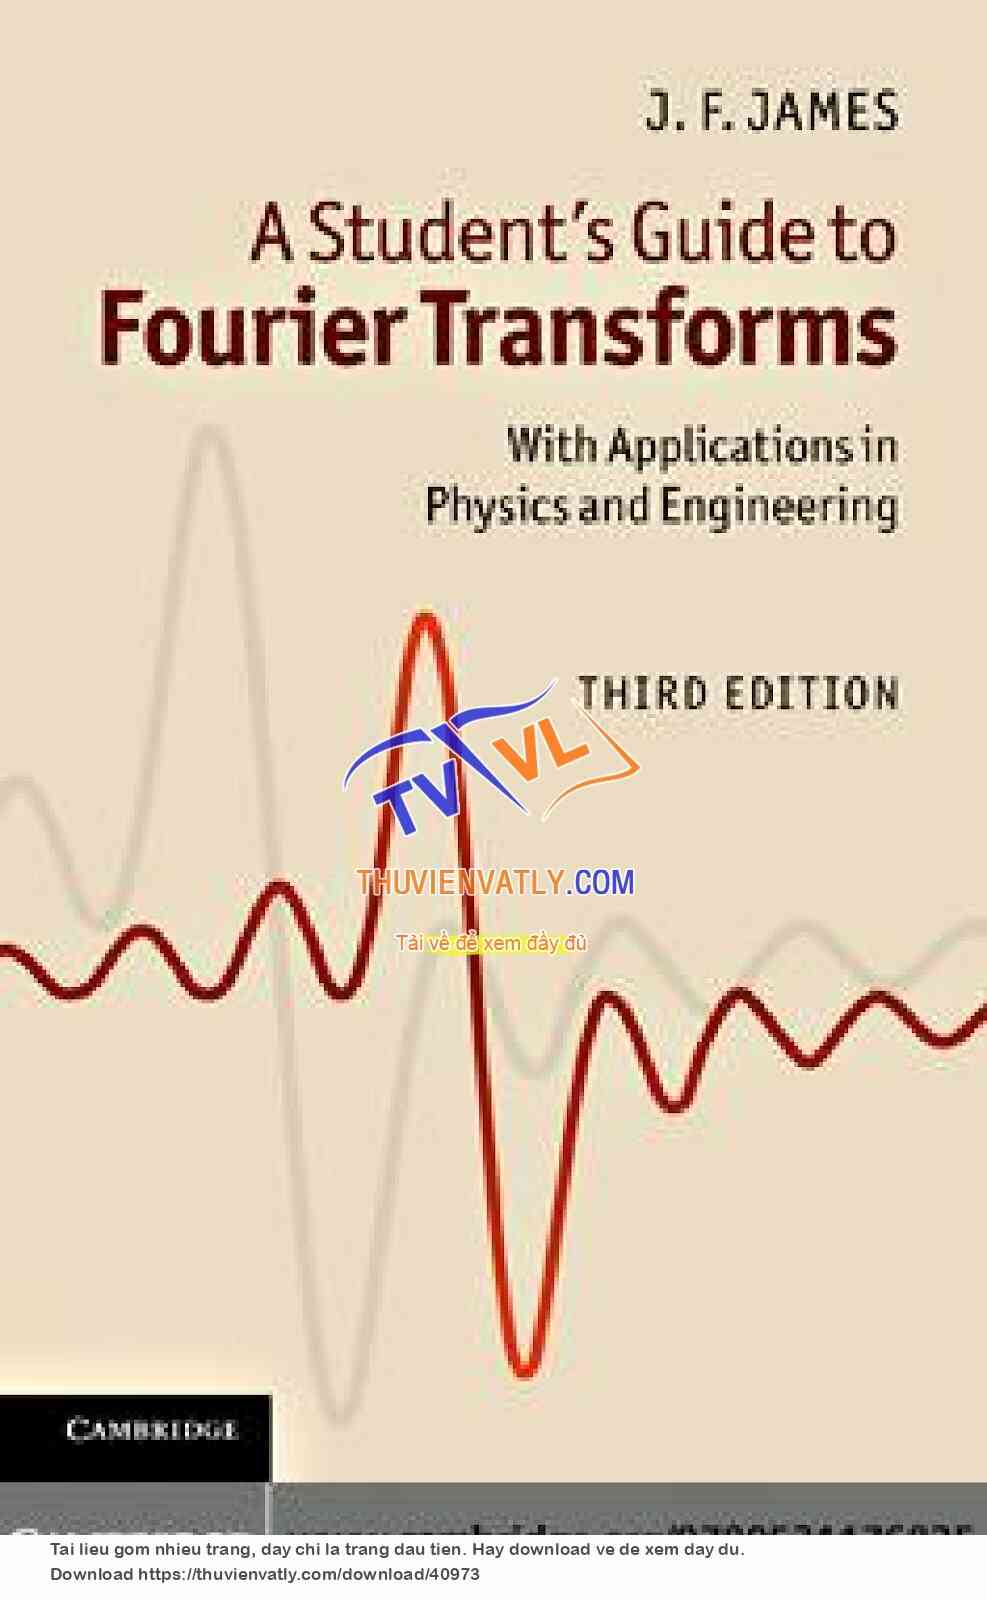 A Student's Guide to Fourier Transforms With Applications in Physics and Engineering